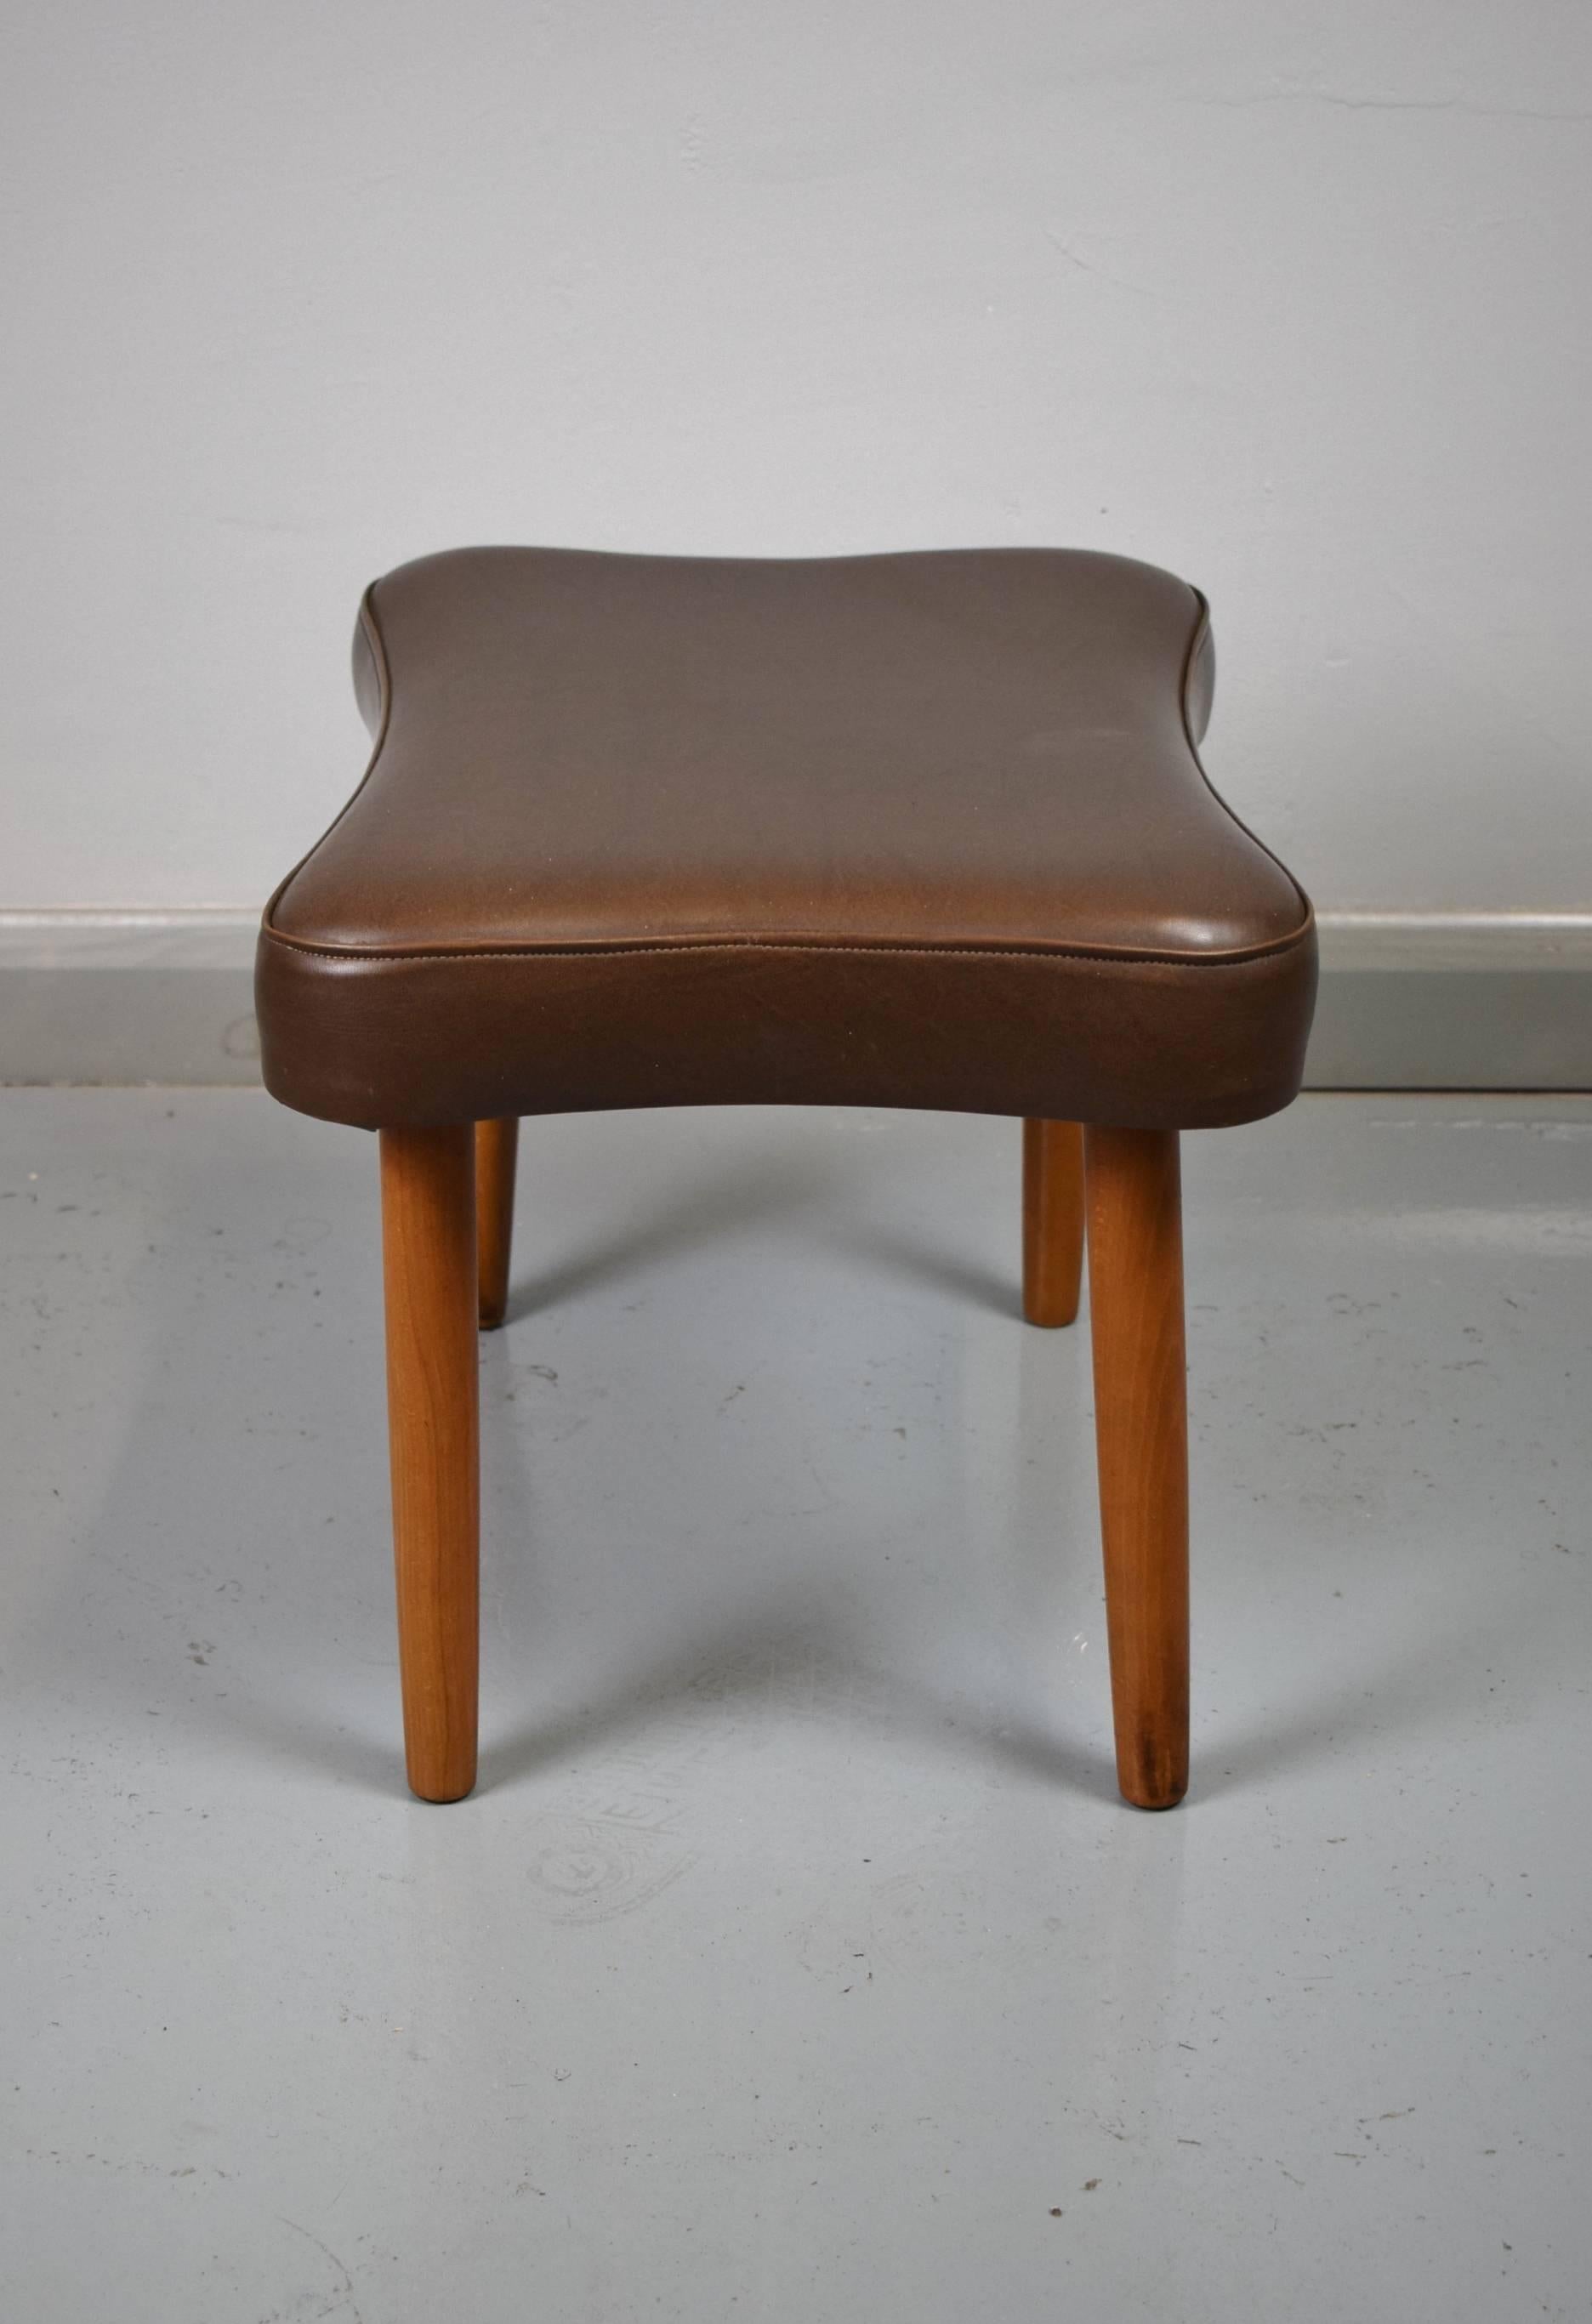 Mid-Century Retro Danish Brown Leather Footstool / Ottoman, 1960s-1970s In Excellent Condition For Sale In Selston, Nottinghamshire